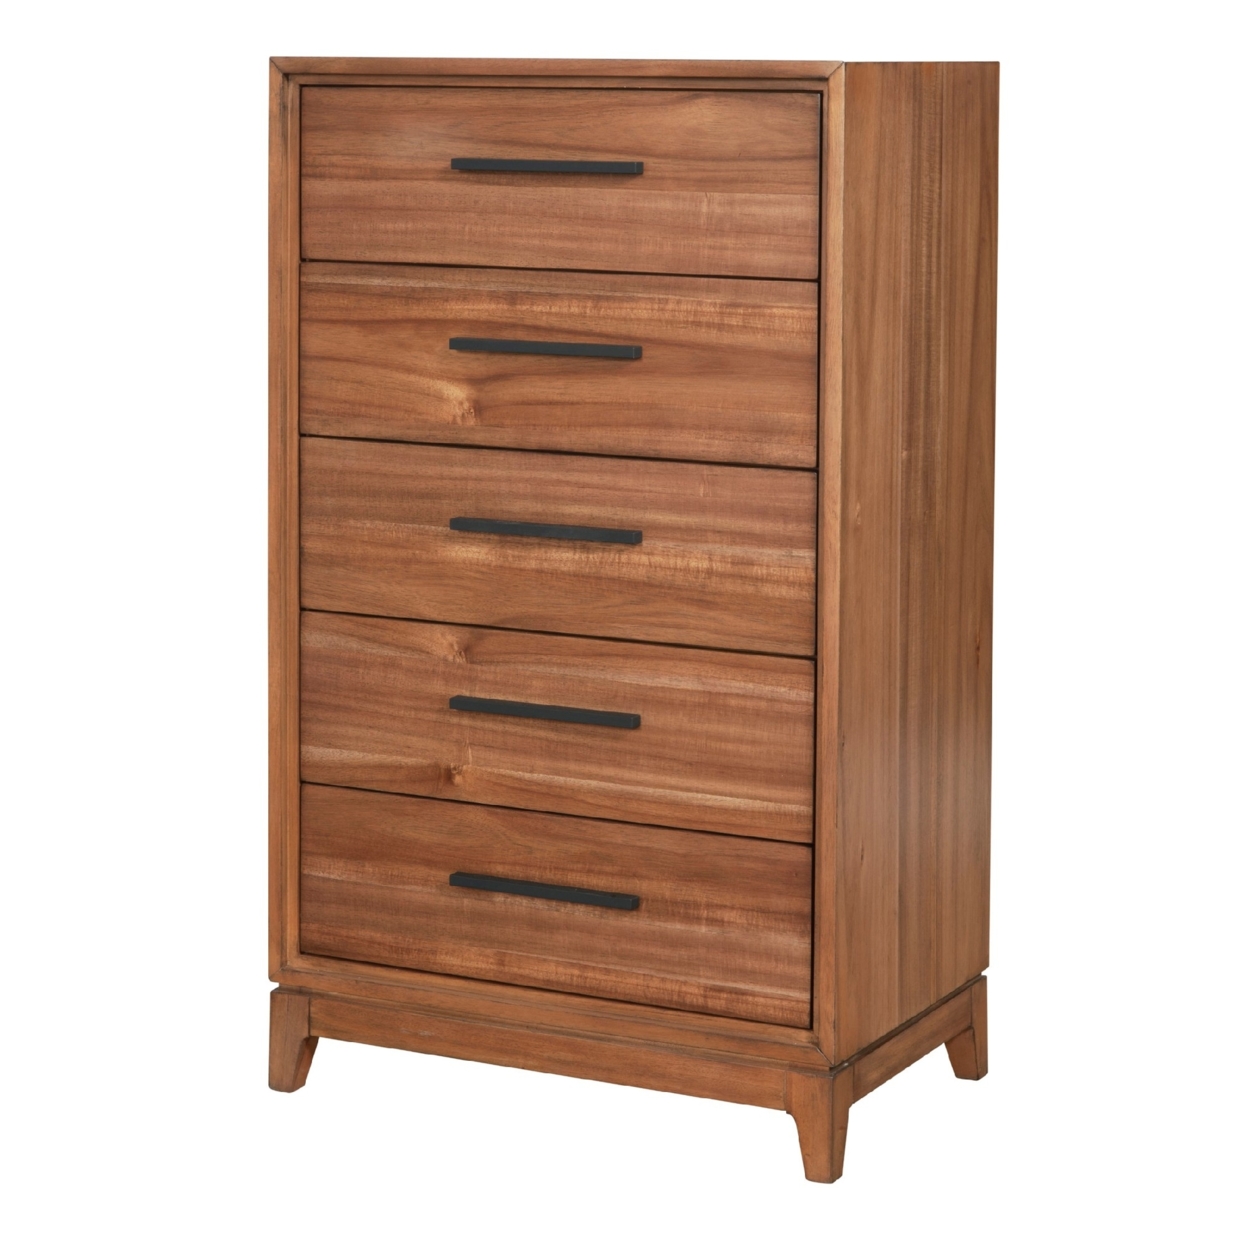 Chest With 5 Drawers And Wooden Frame, Brown- Saltoro Sherpi